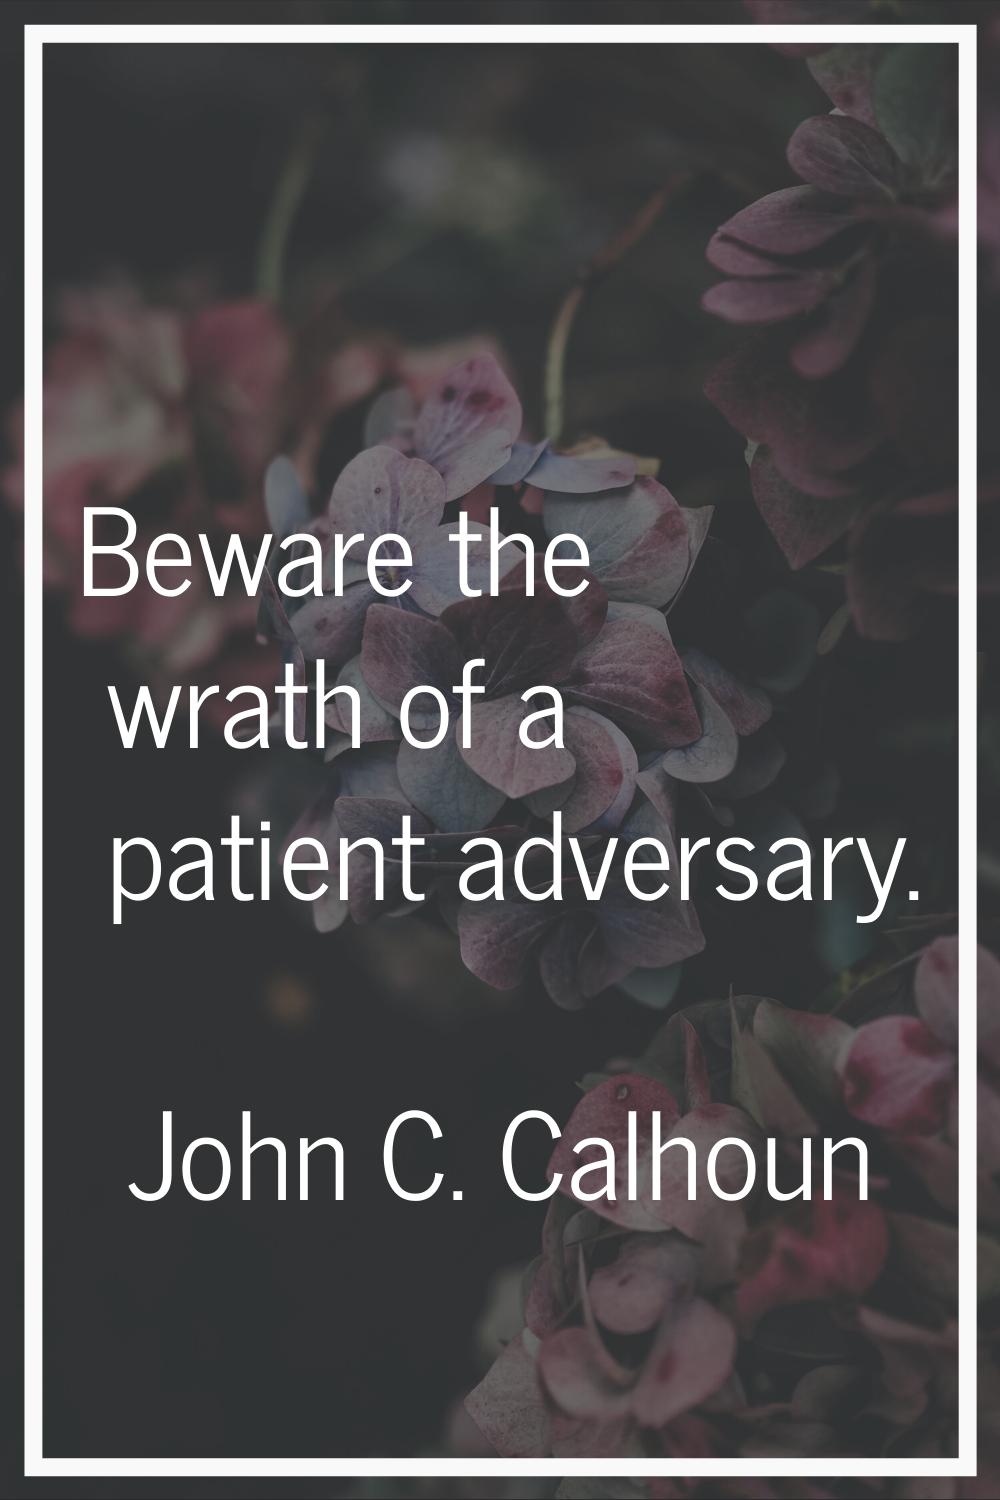 Beware the wrath of a patient adversary.